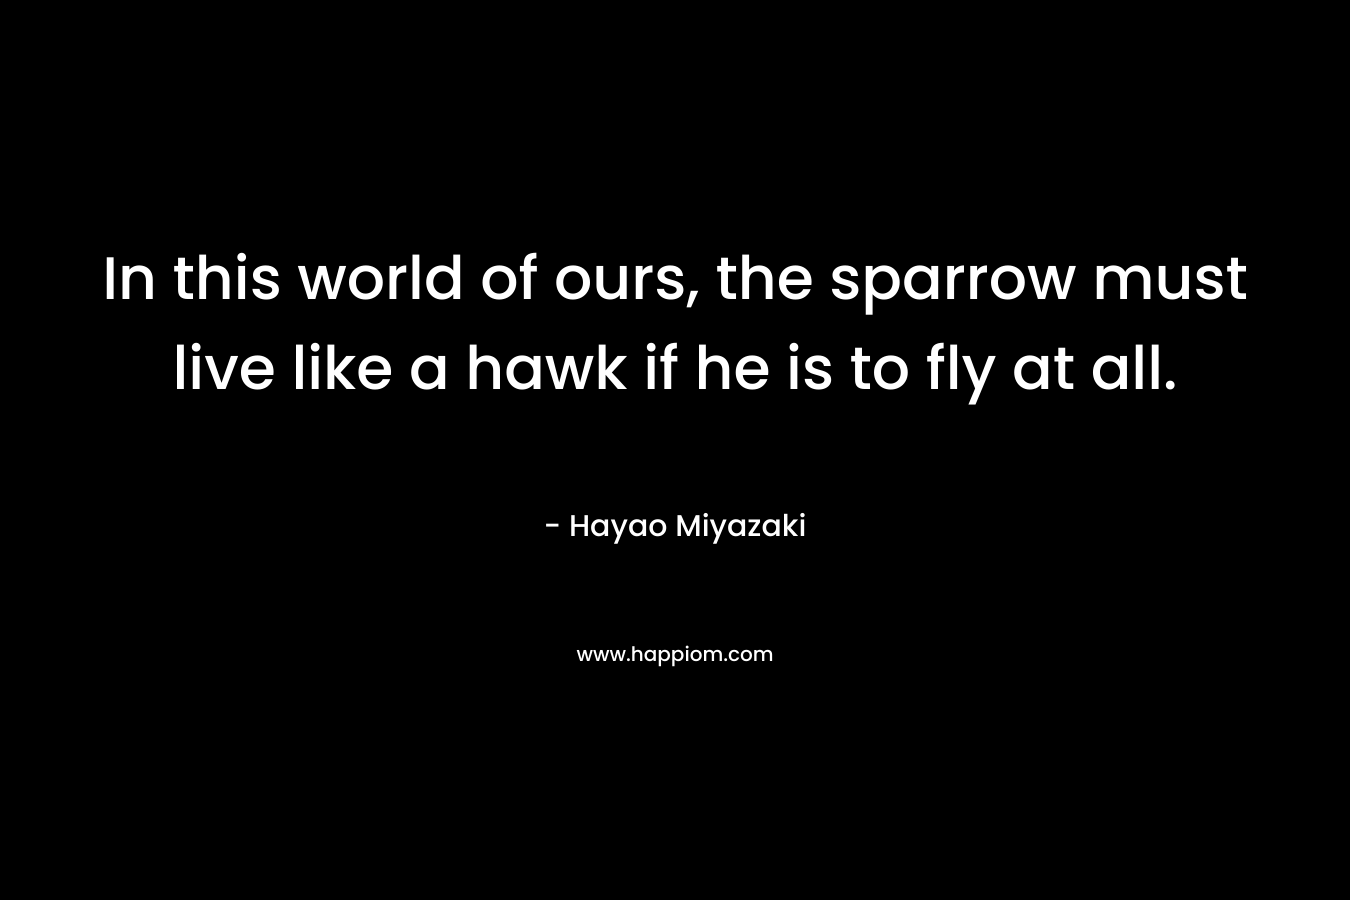 In this world of ours, the sparrow must live like a hawk if he is to fly at all. – Hayao Miyazaki